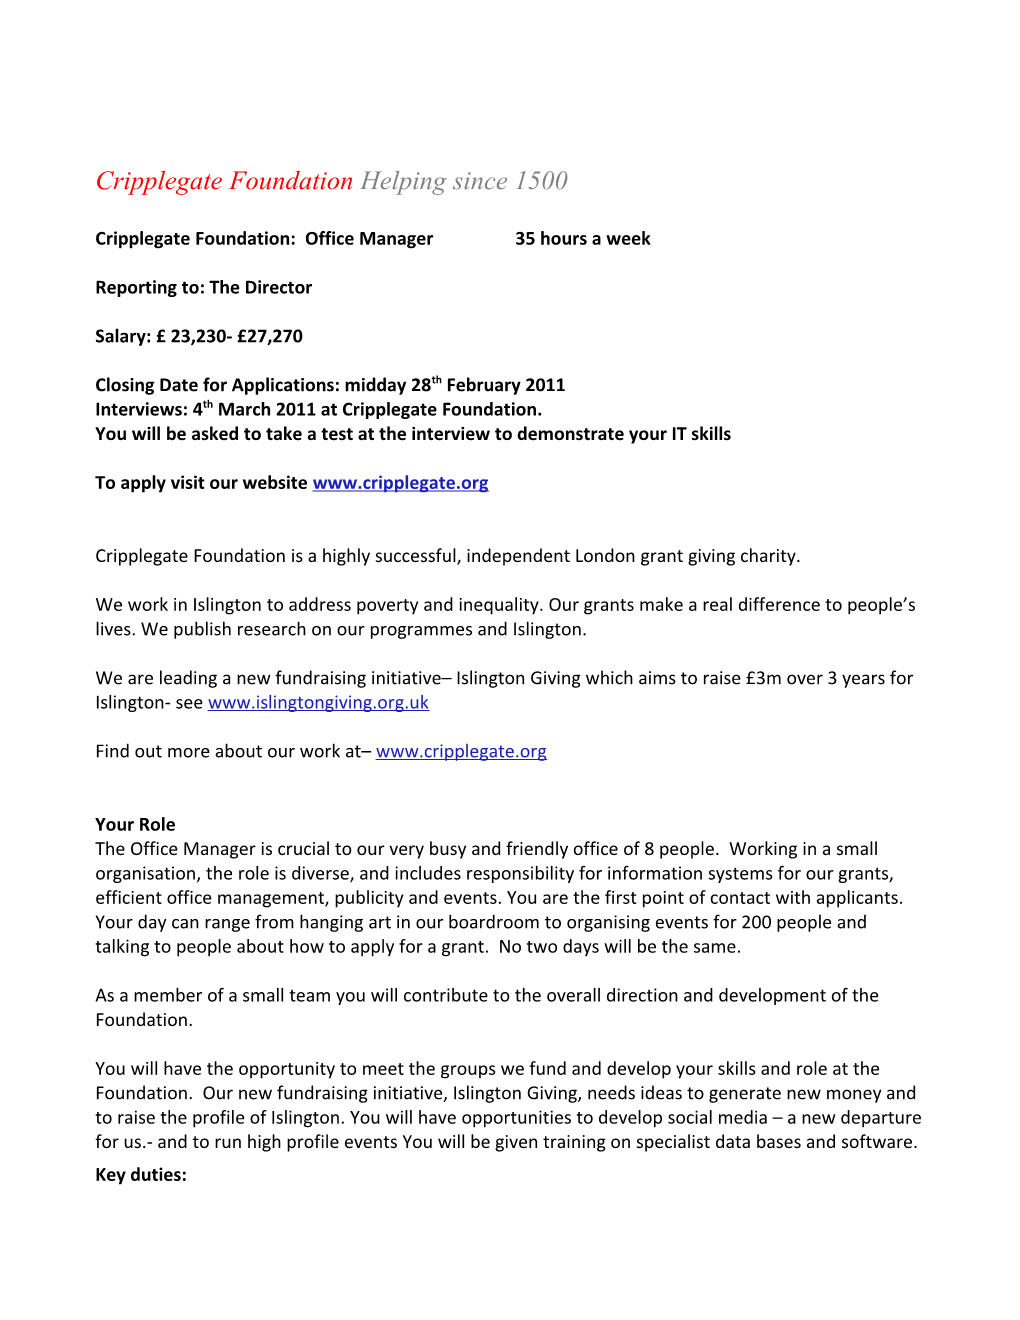 Cripplegate Foundation: Office Manager35 Hours a Week